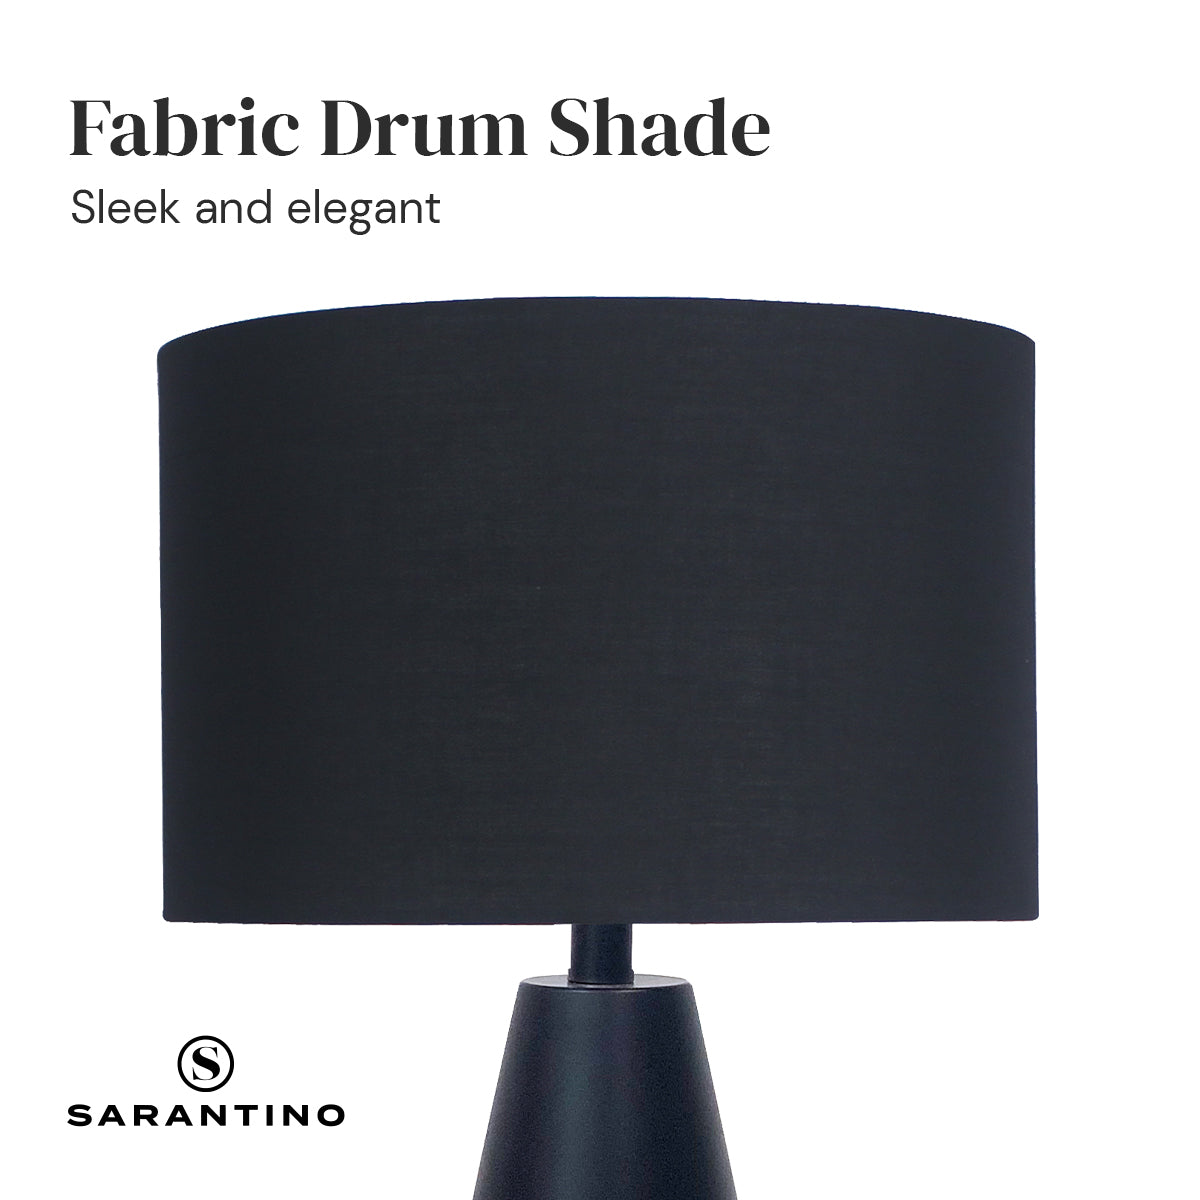 Sarantino Metal Table Lamp in Black and Gold - BM House & Garden